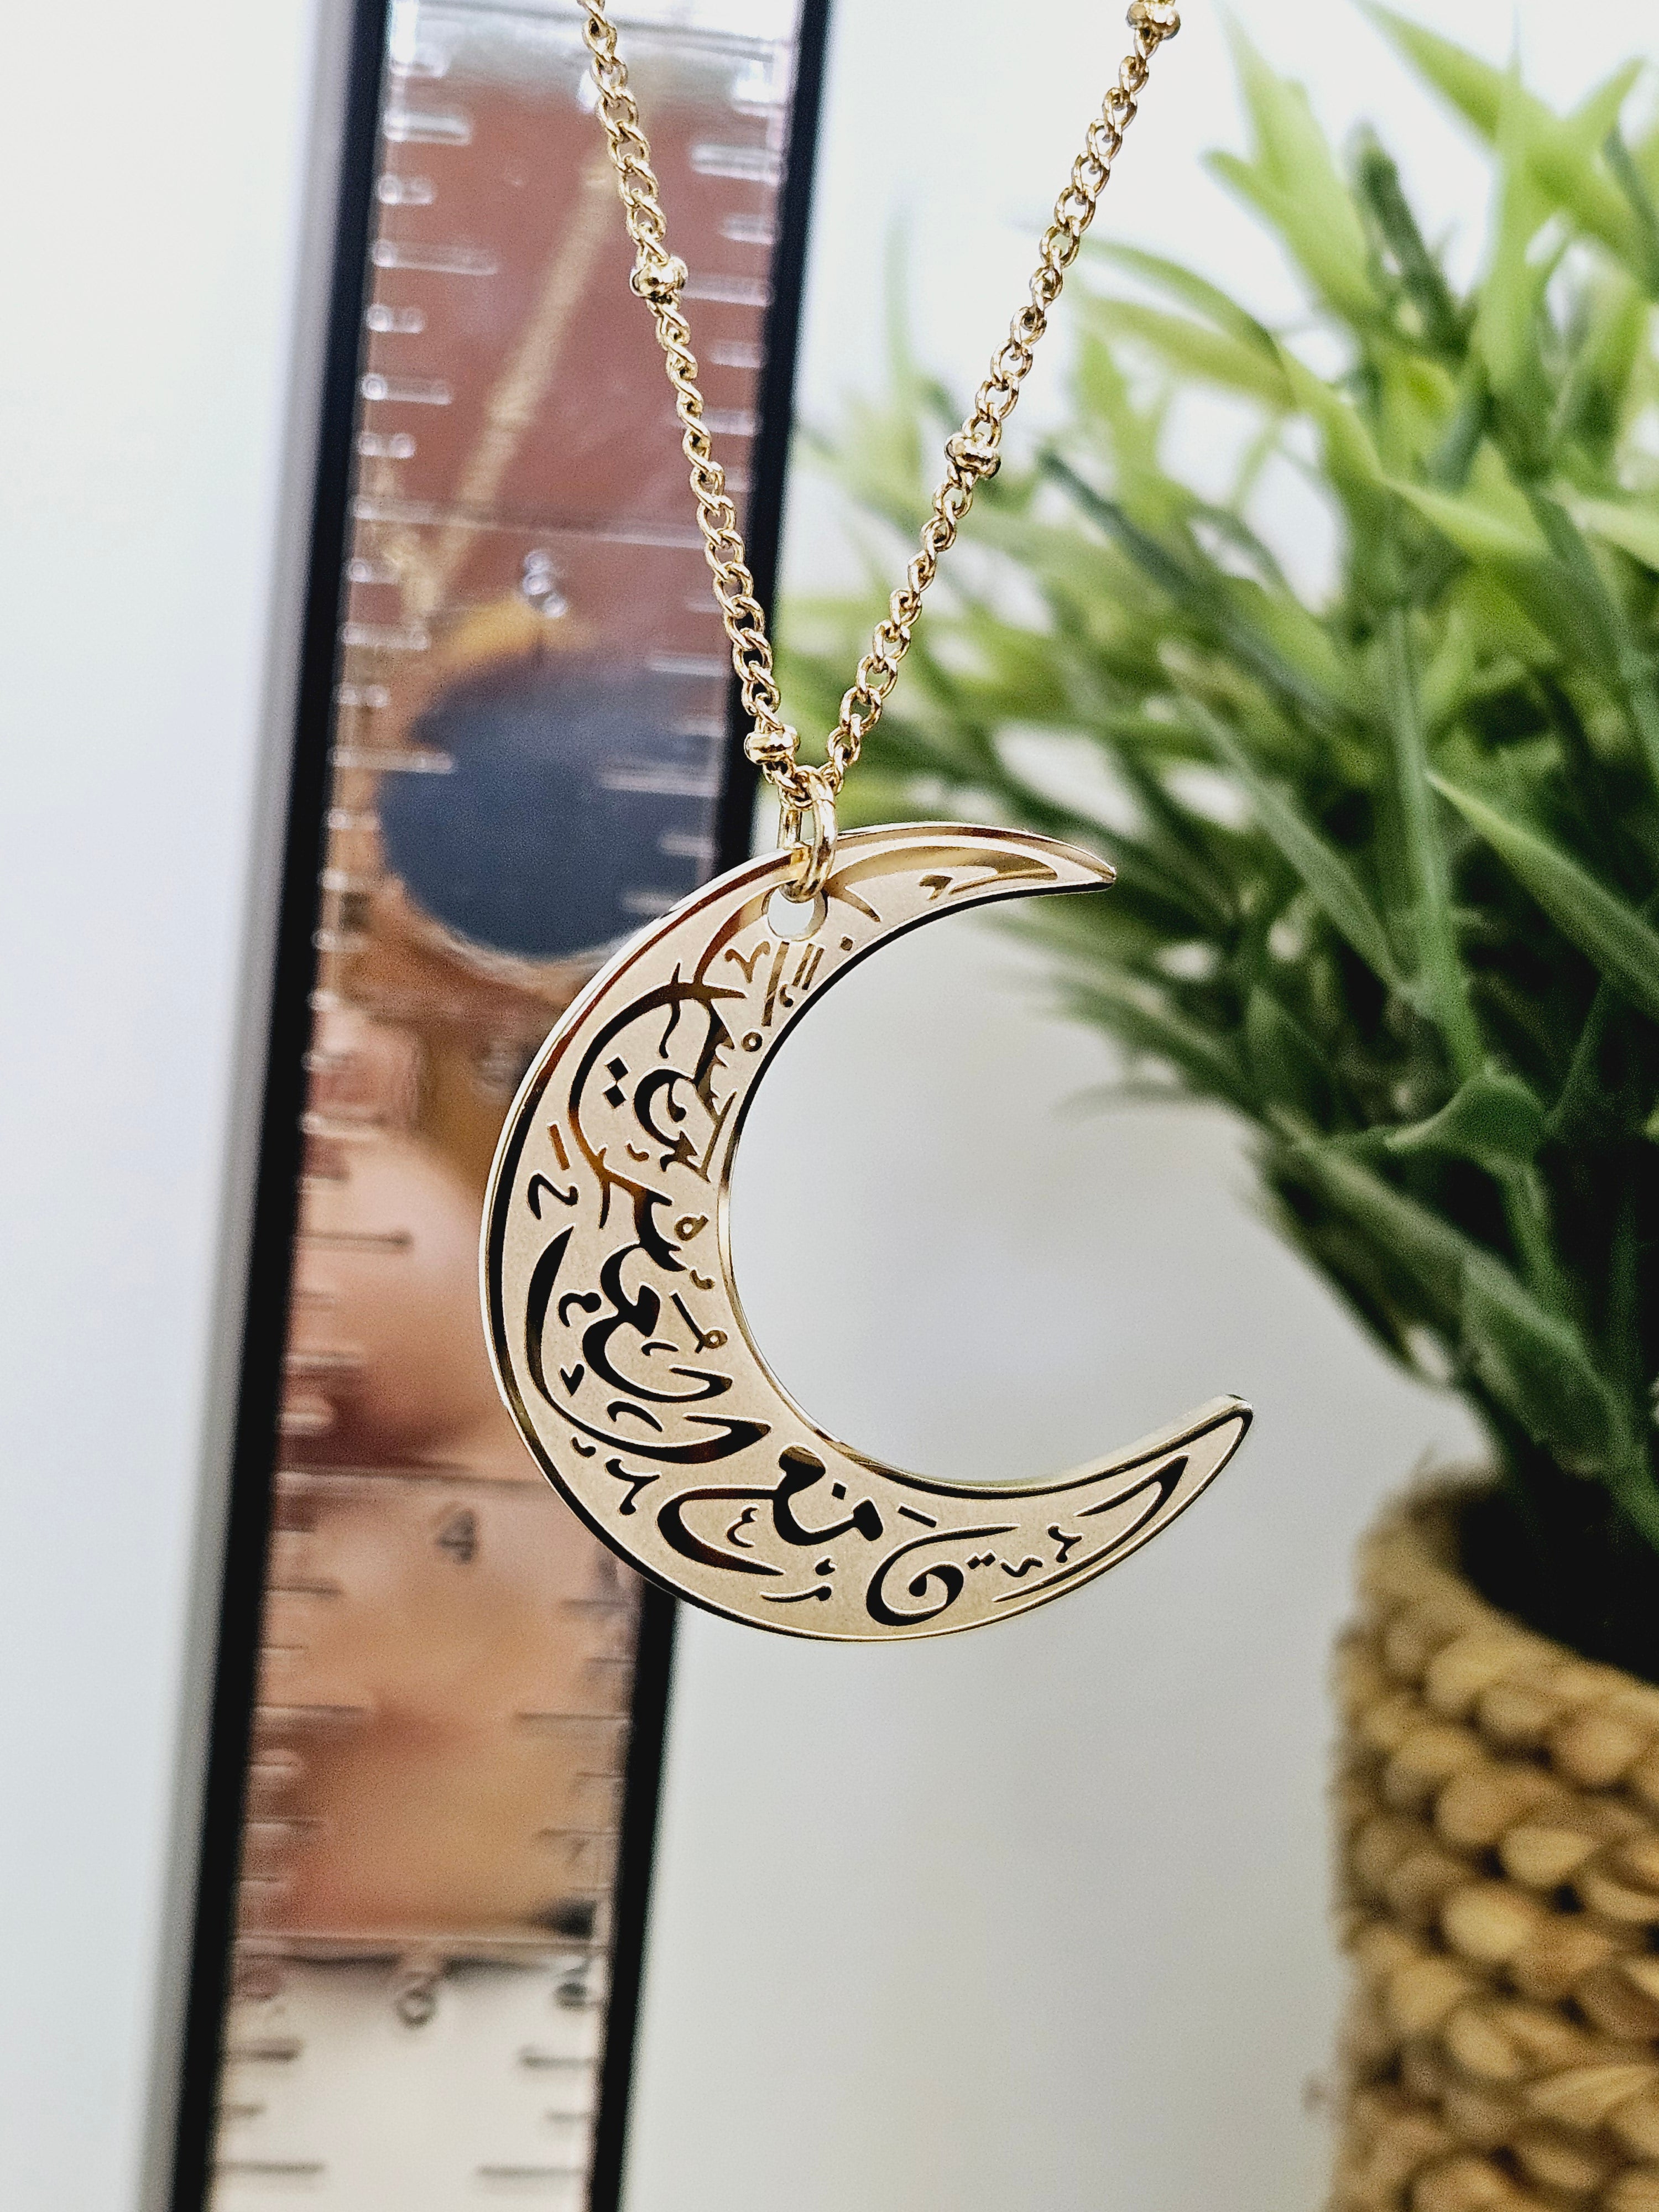 Moon Necklace - “Certainly with difficulty comes ease”. - Habibi Heritage